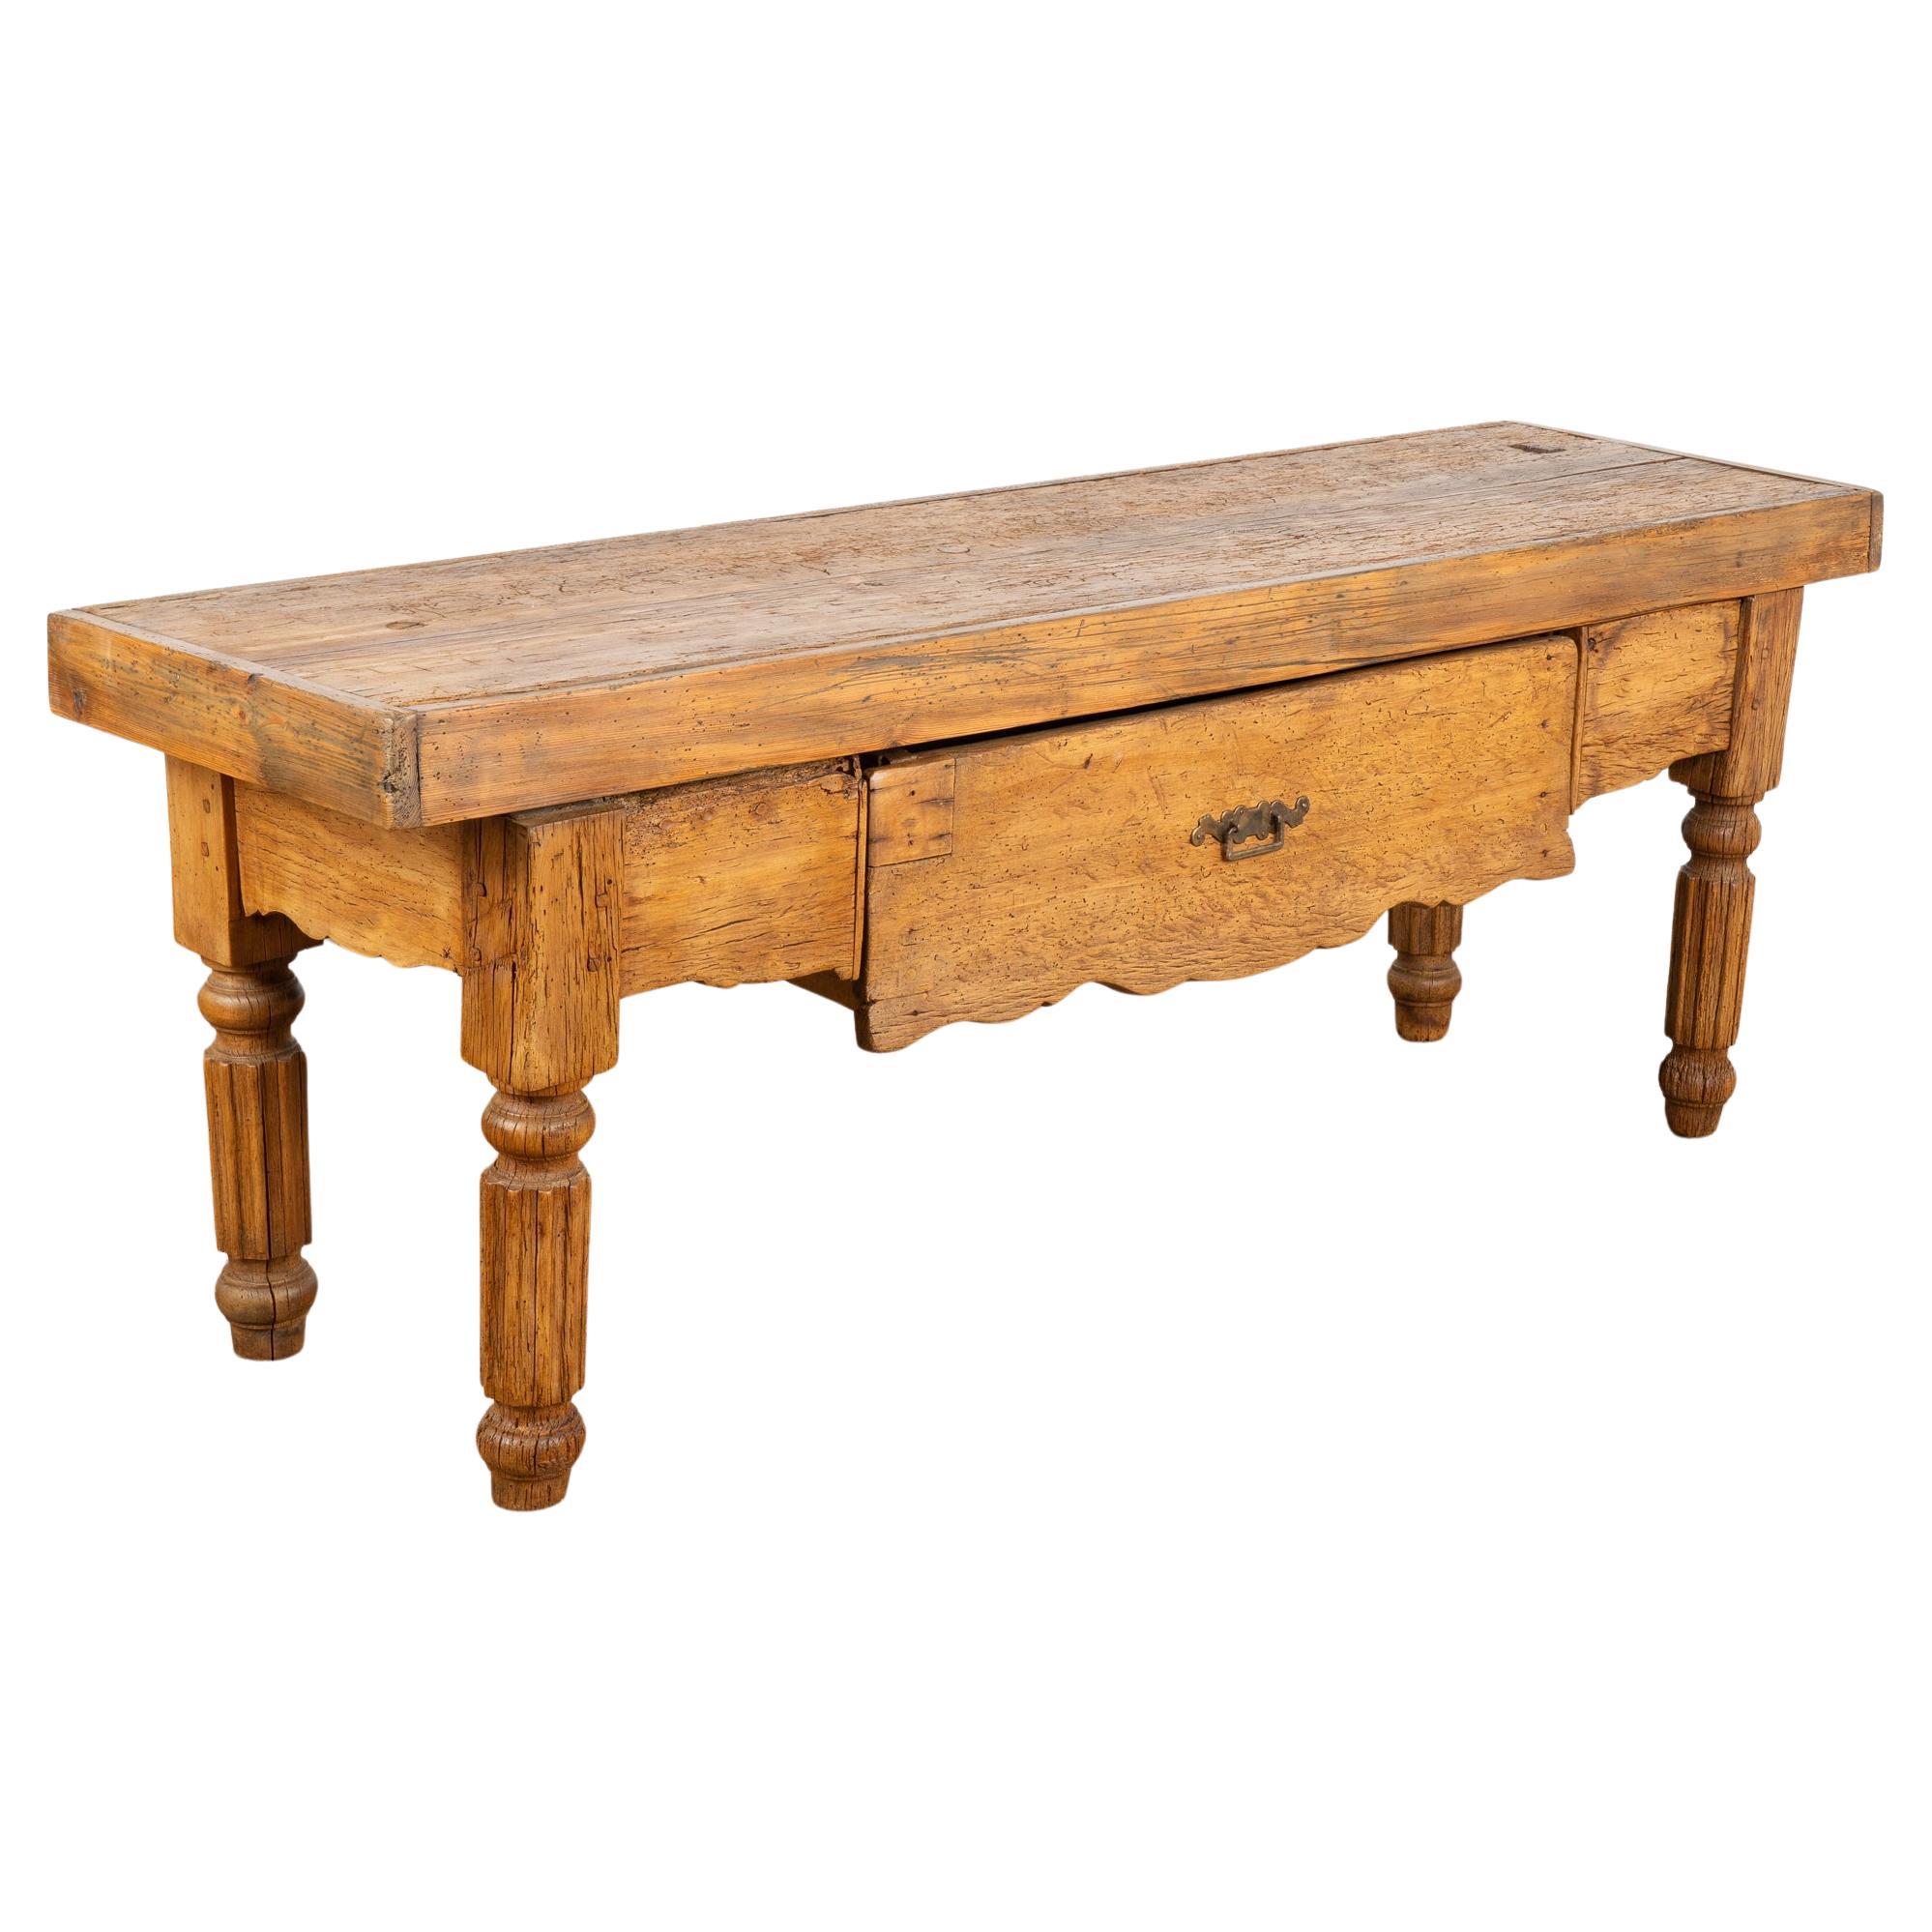 Rustic Console Table from France, circa 1840-60